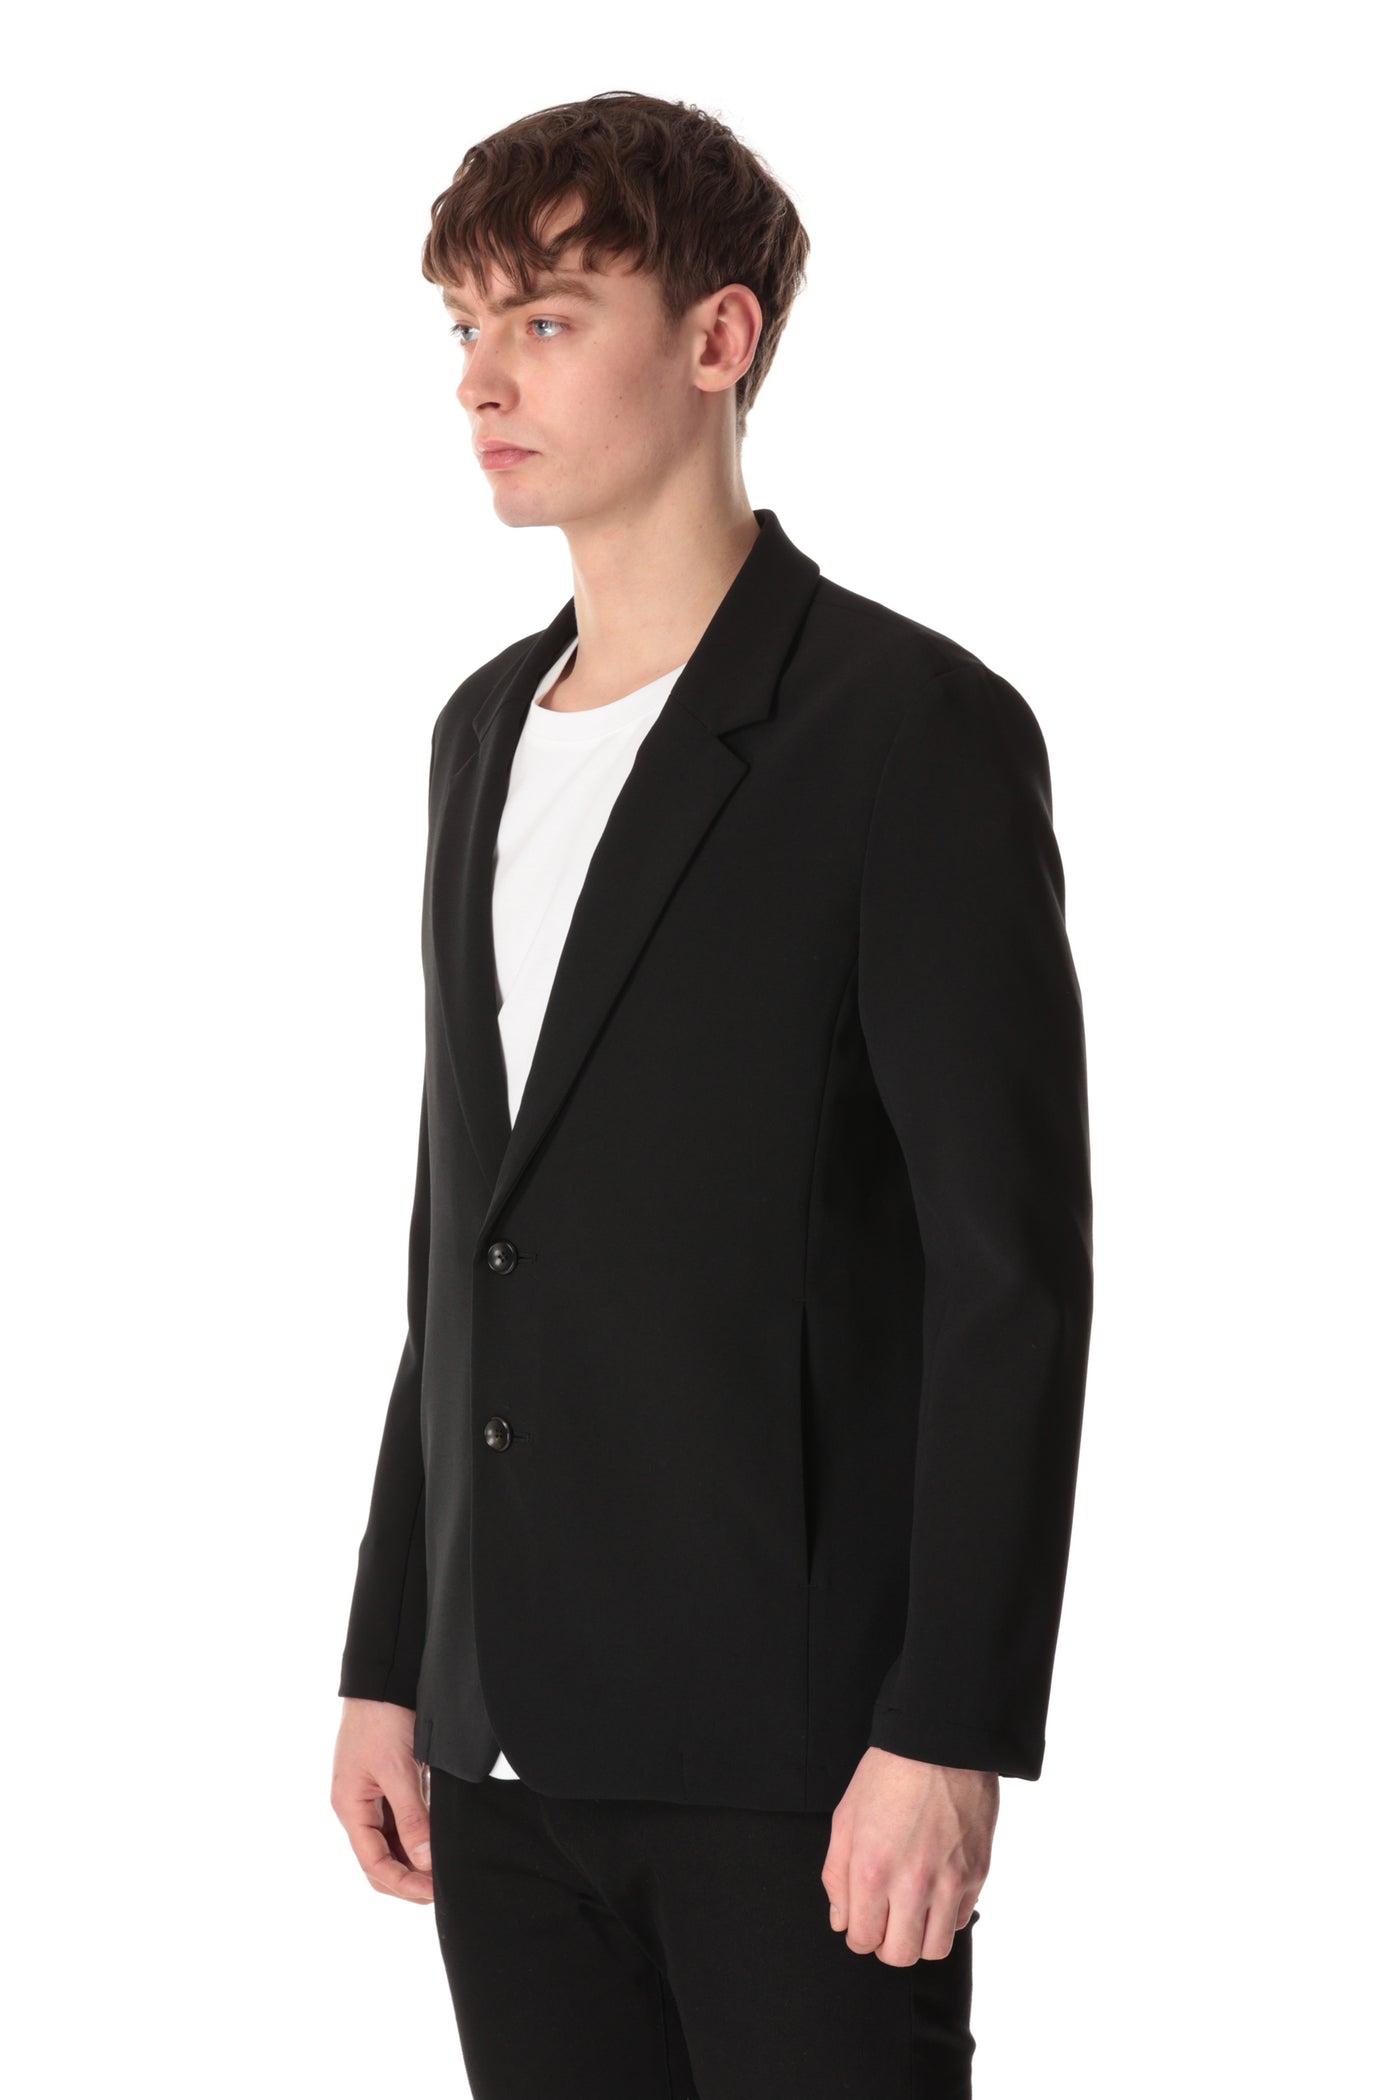 AG32-060 Polyester stretch double cloth 2B jacket